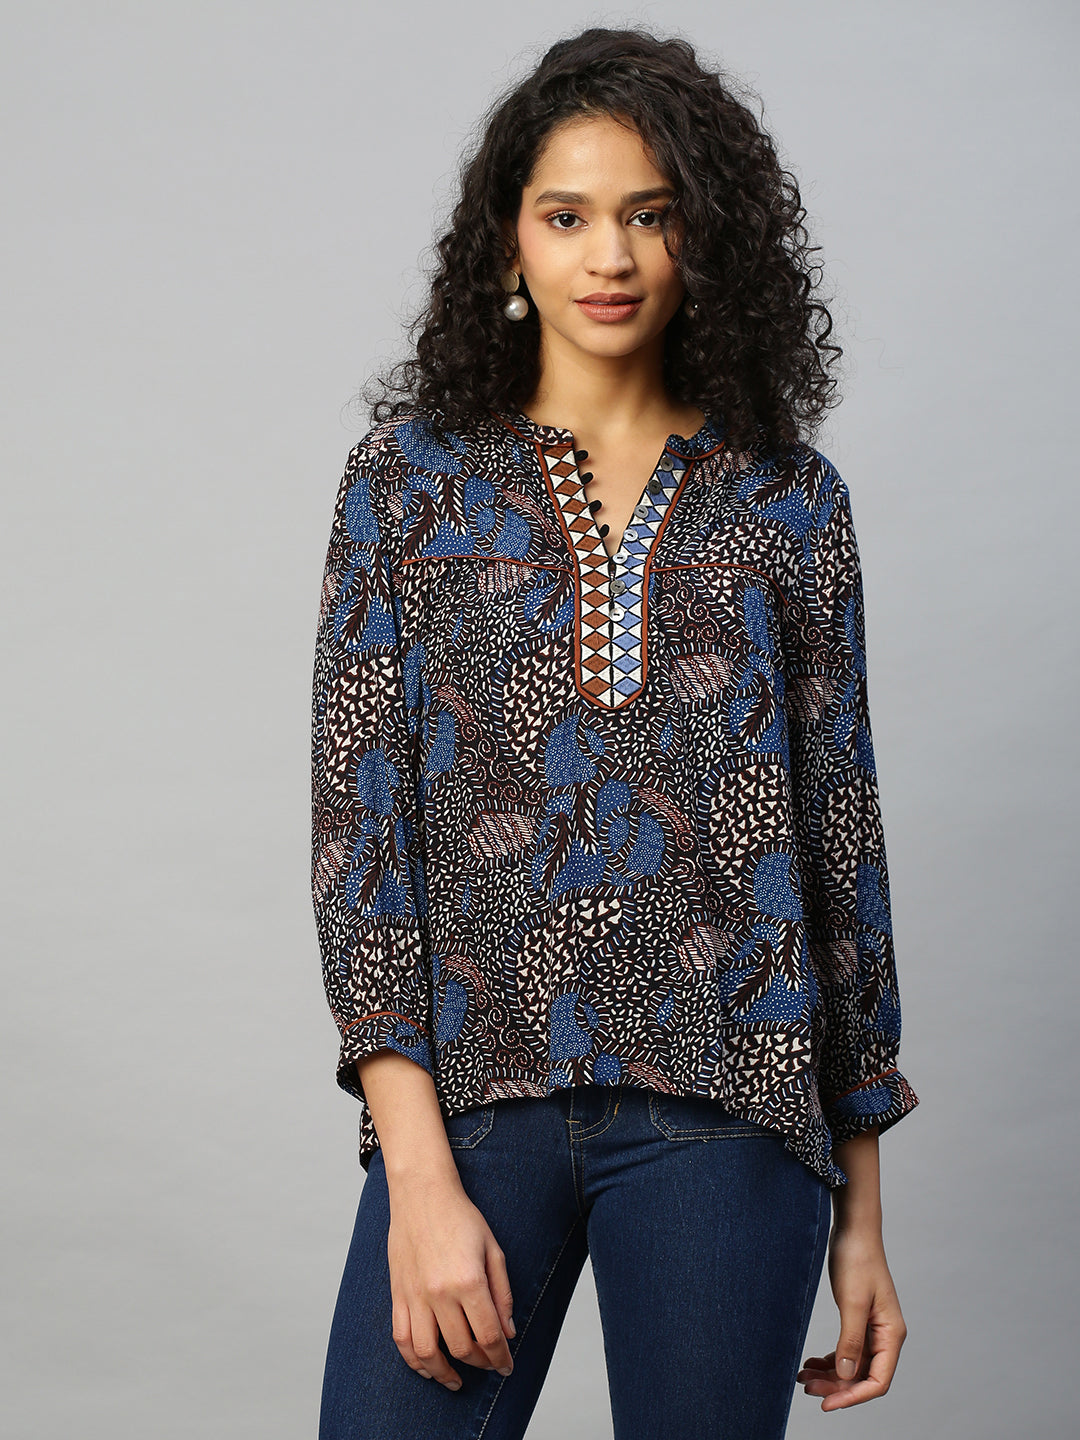 Crinkle Rayon Graphic Embroidered Tunic Top